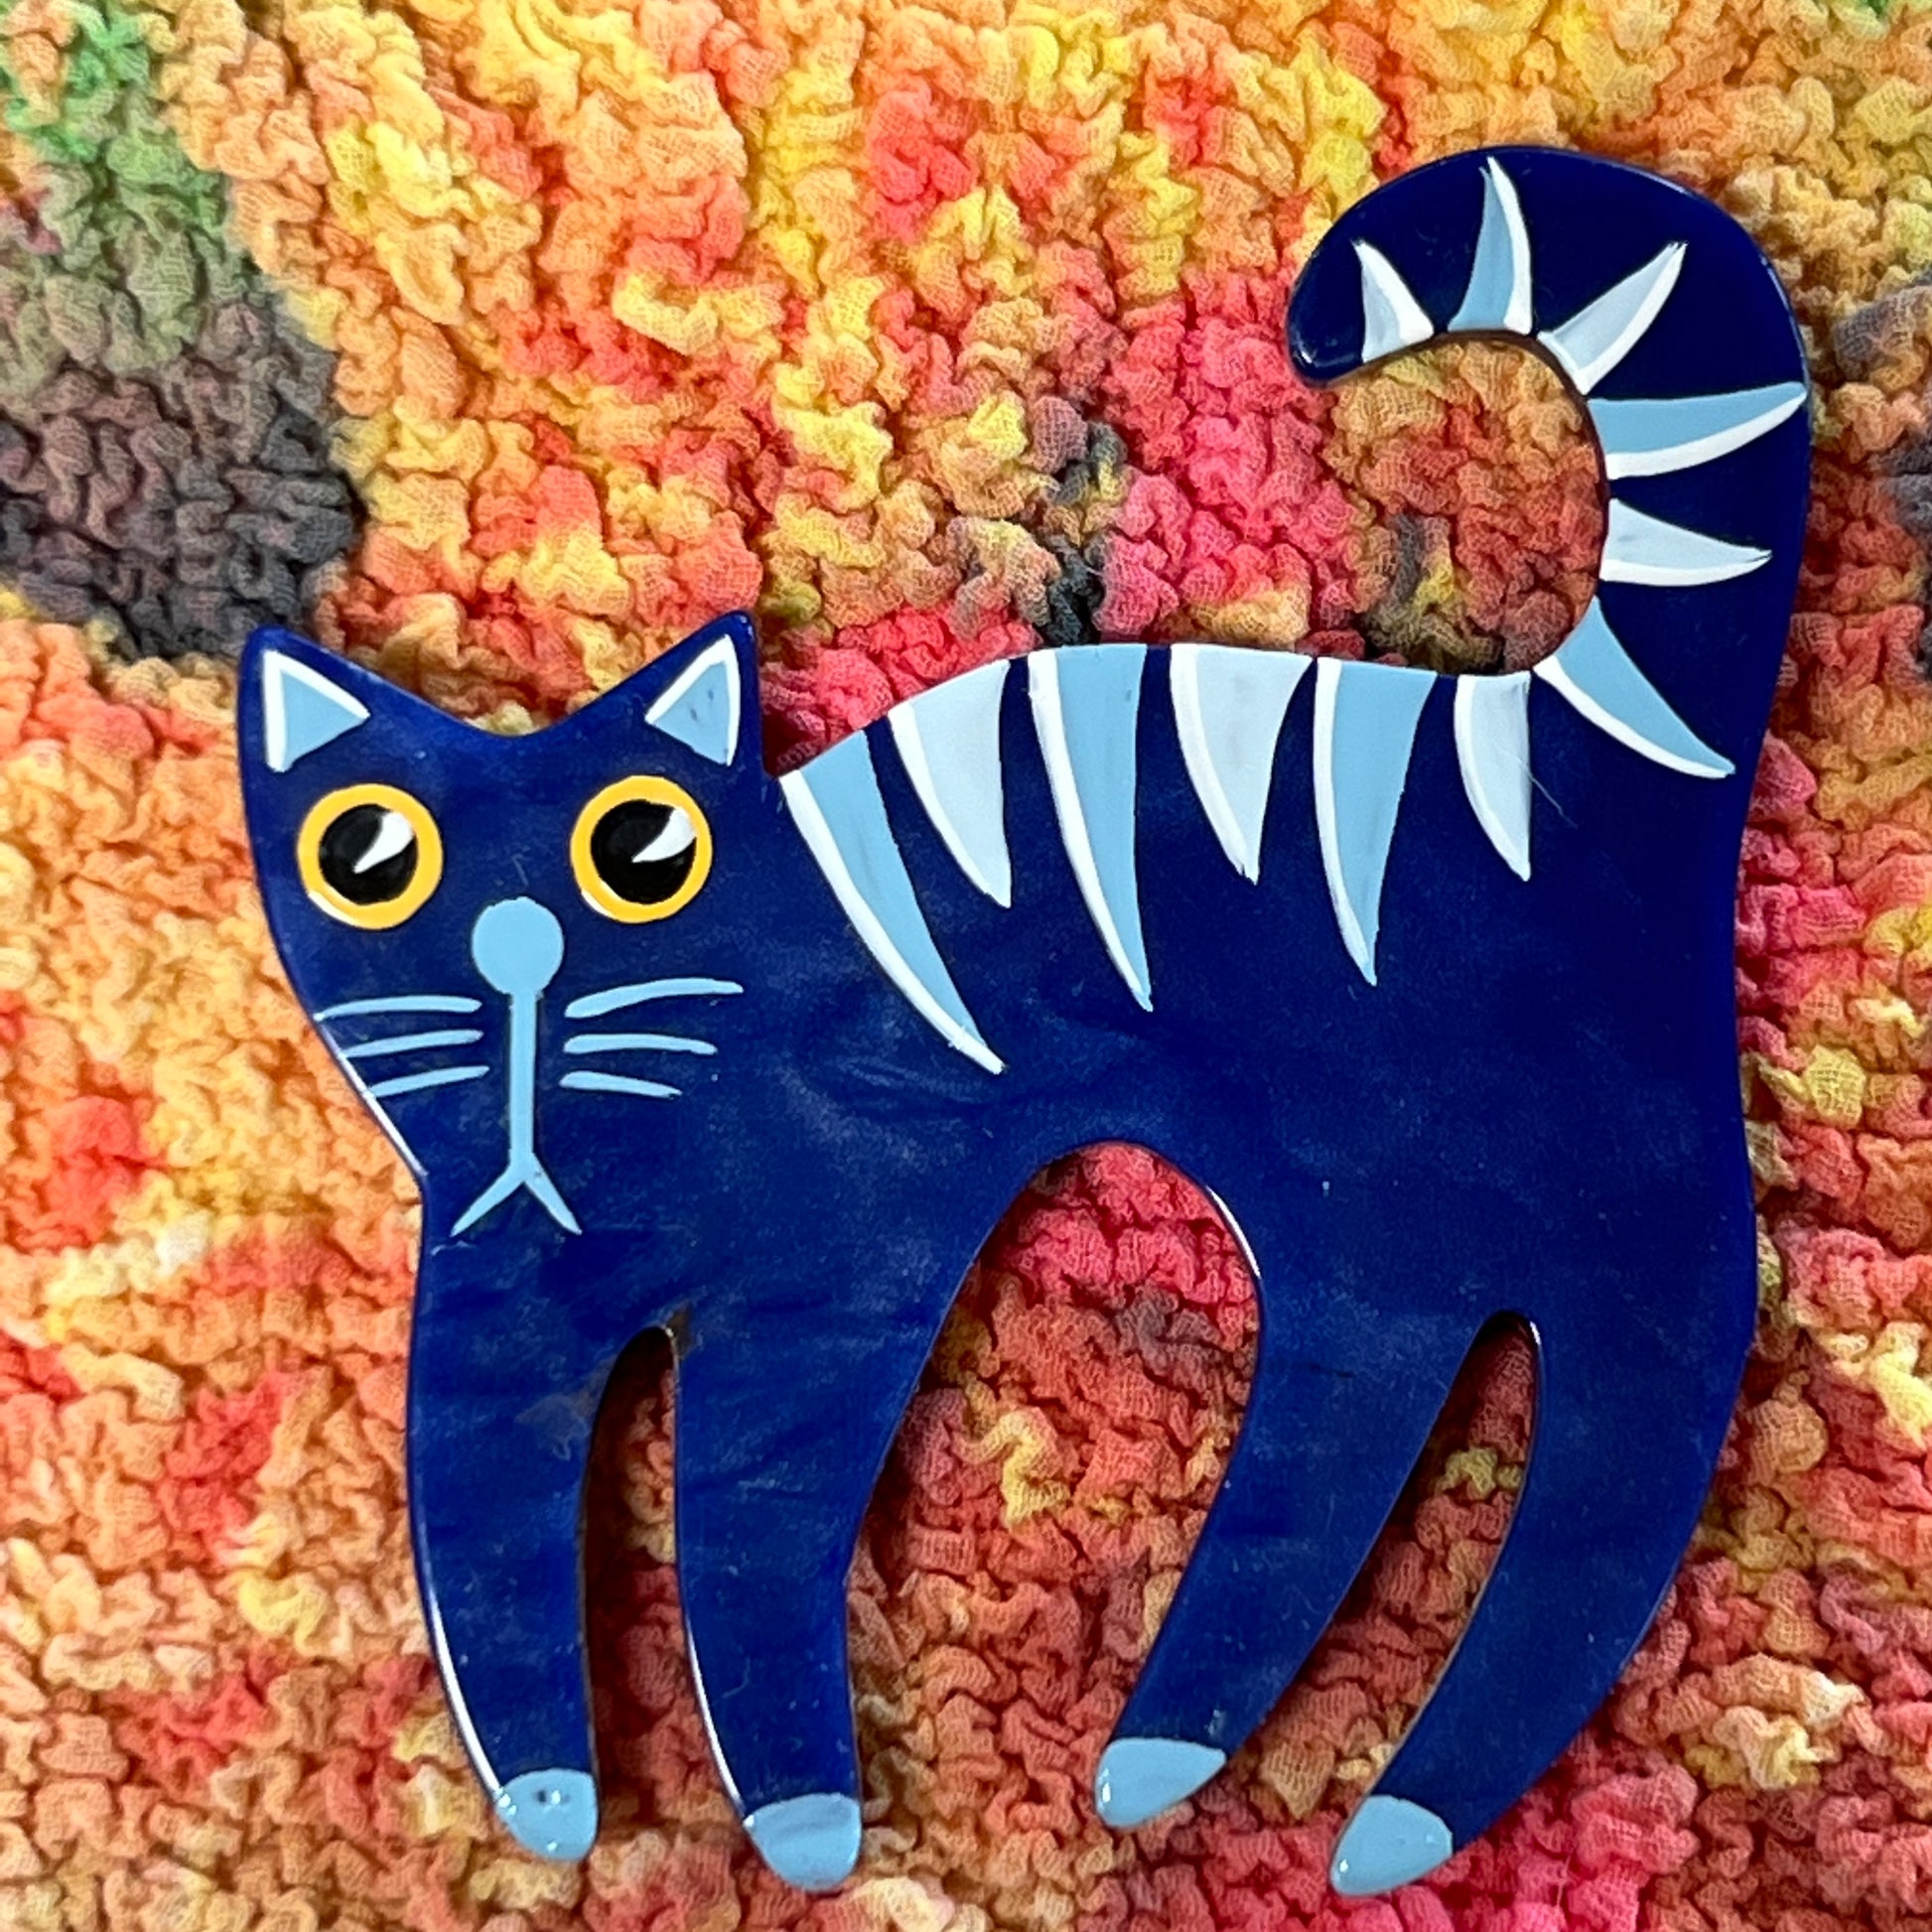 The Wilson Cat Brooch in its Blue Version in galalith